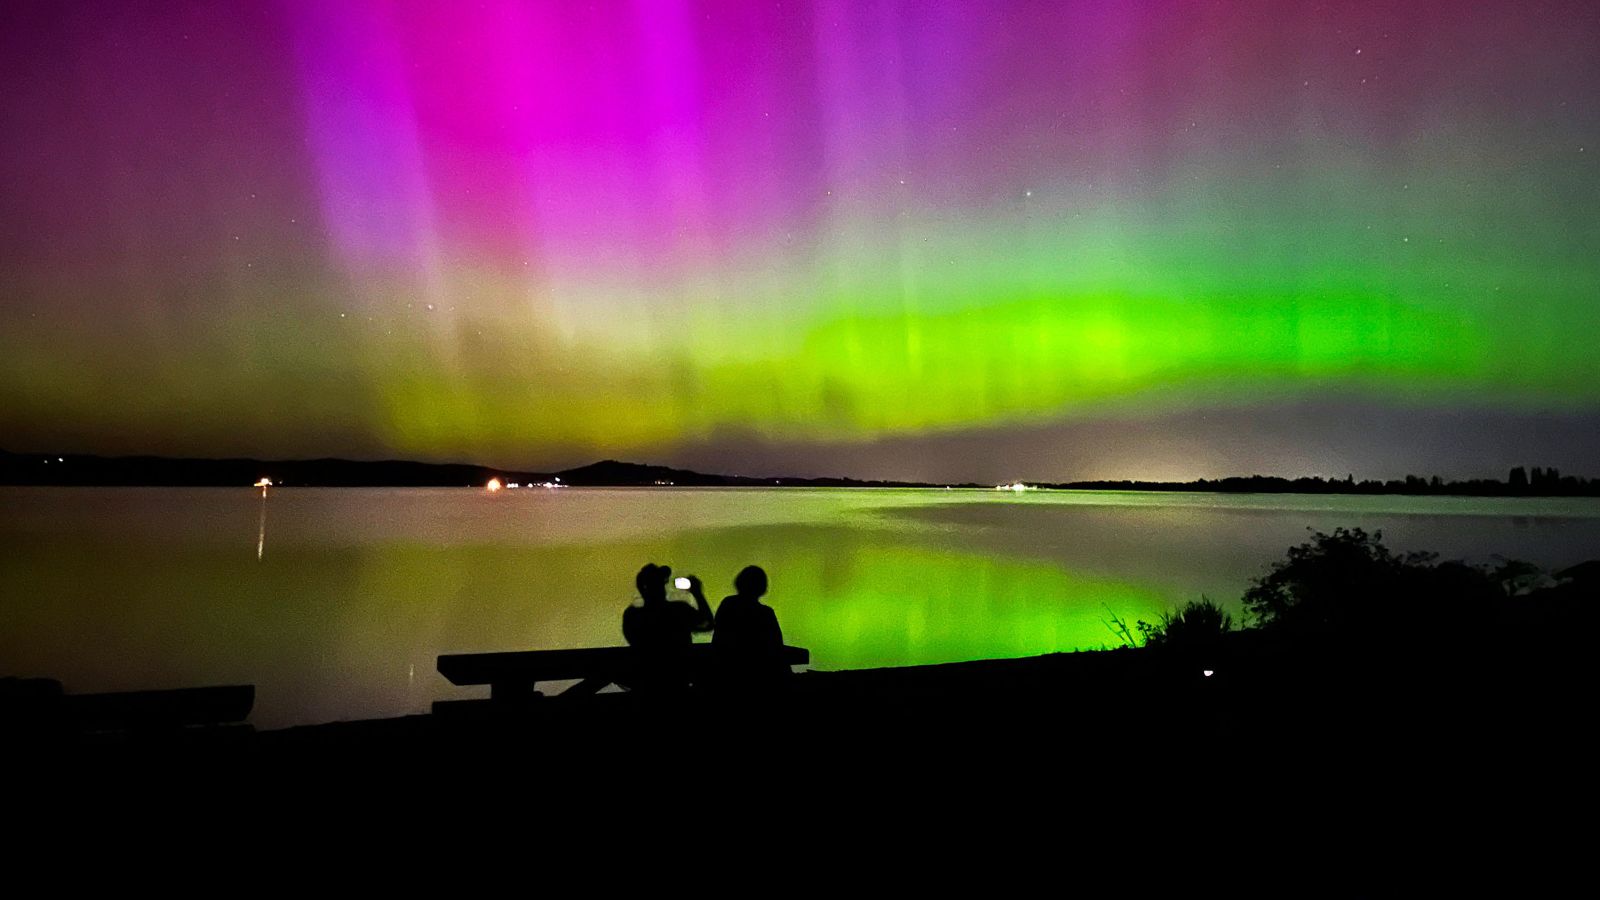 Have you missed the dazzling spectacle of the northern lights?  Maybe she’ll get another chance this Saturday night